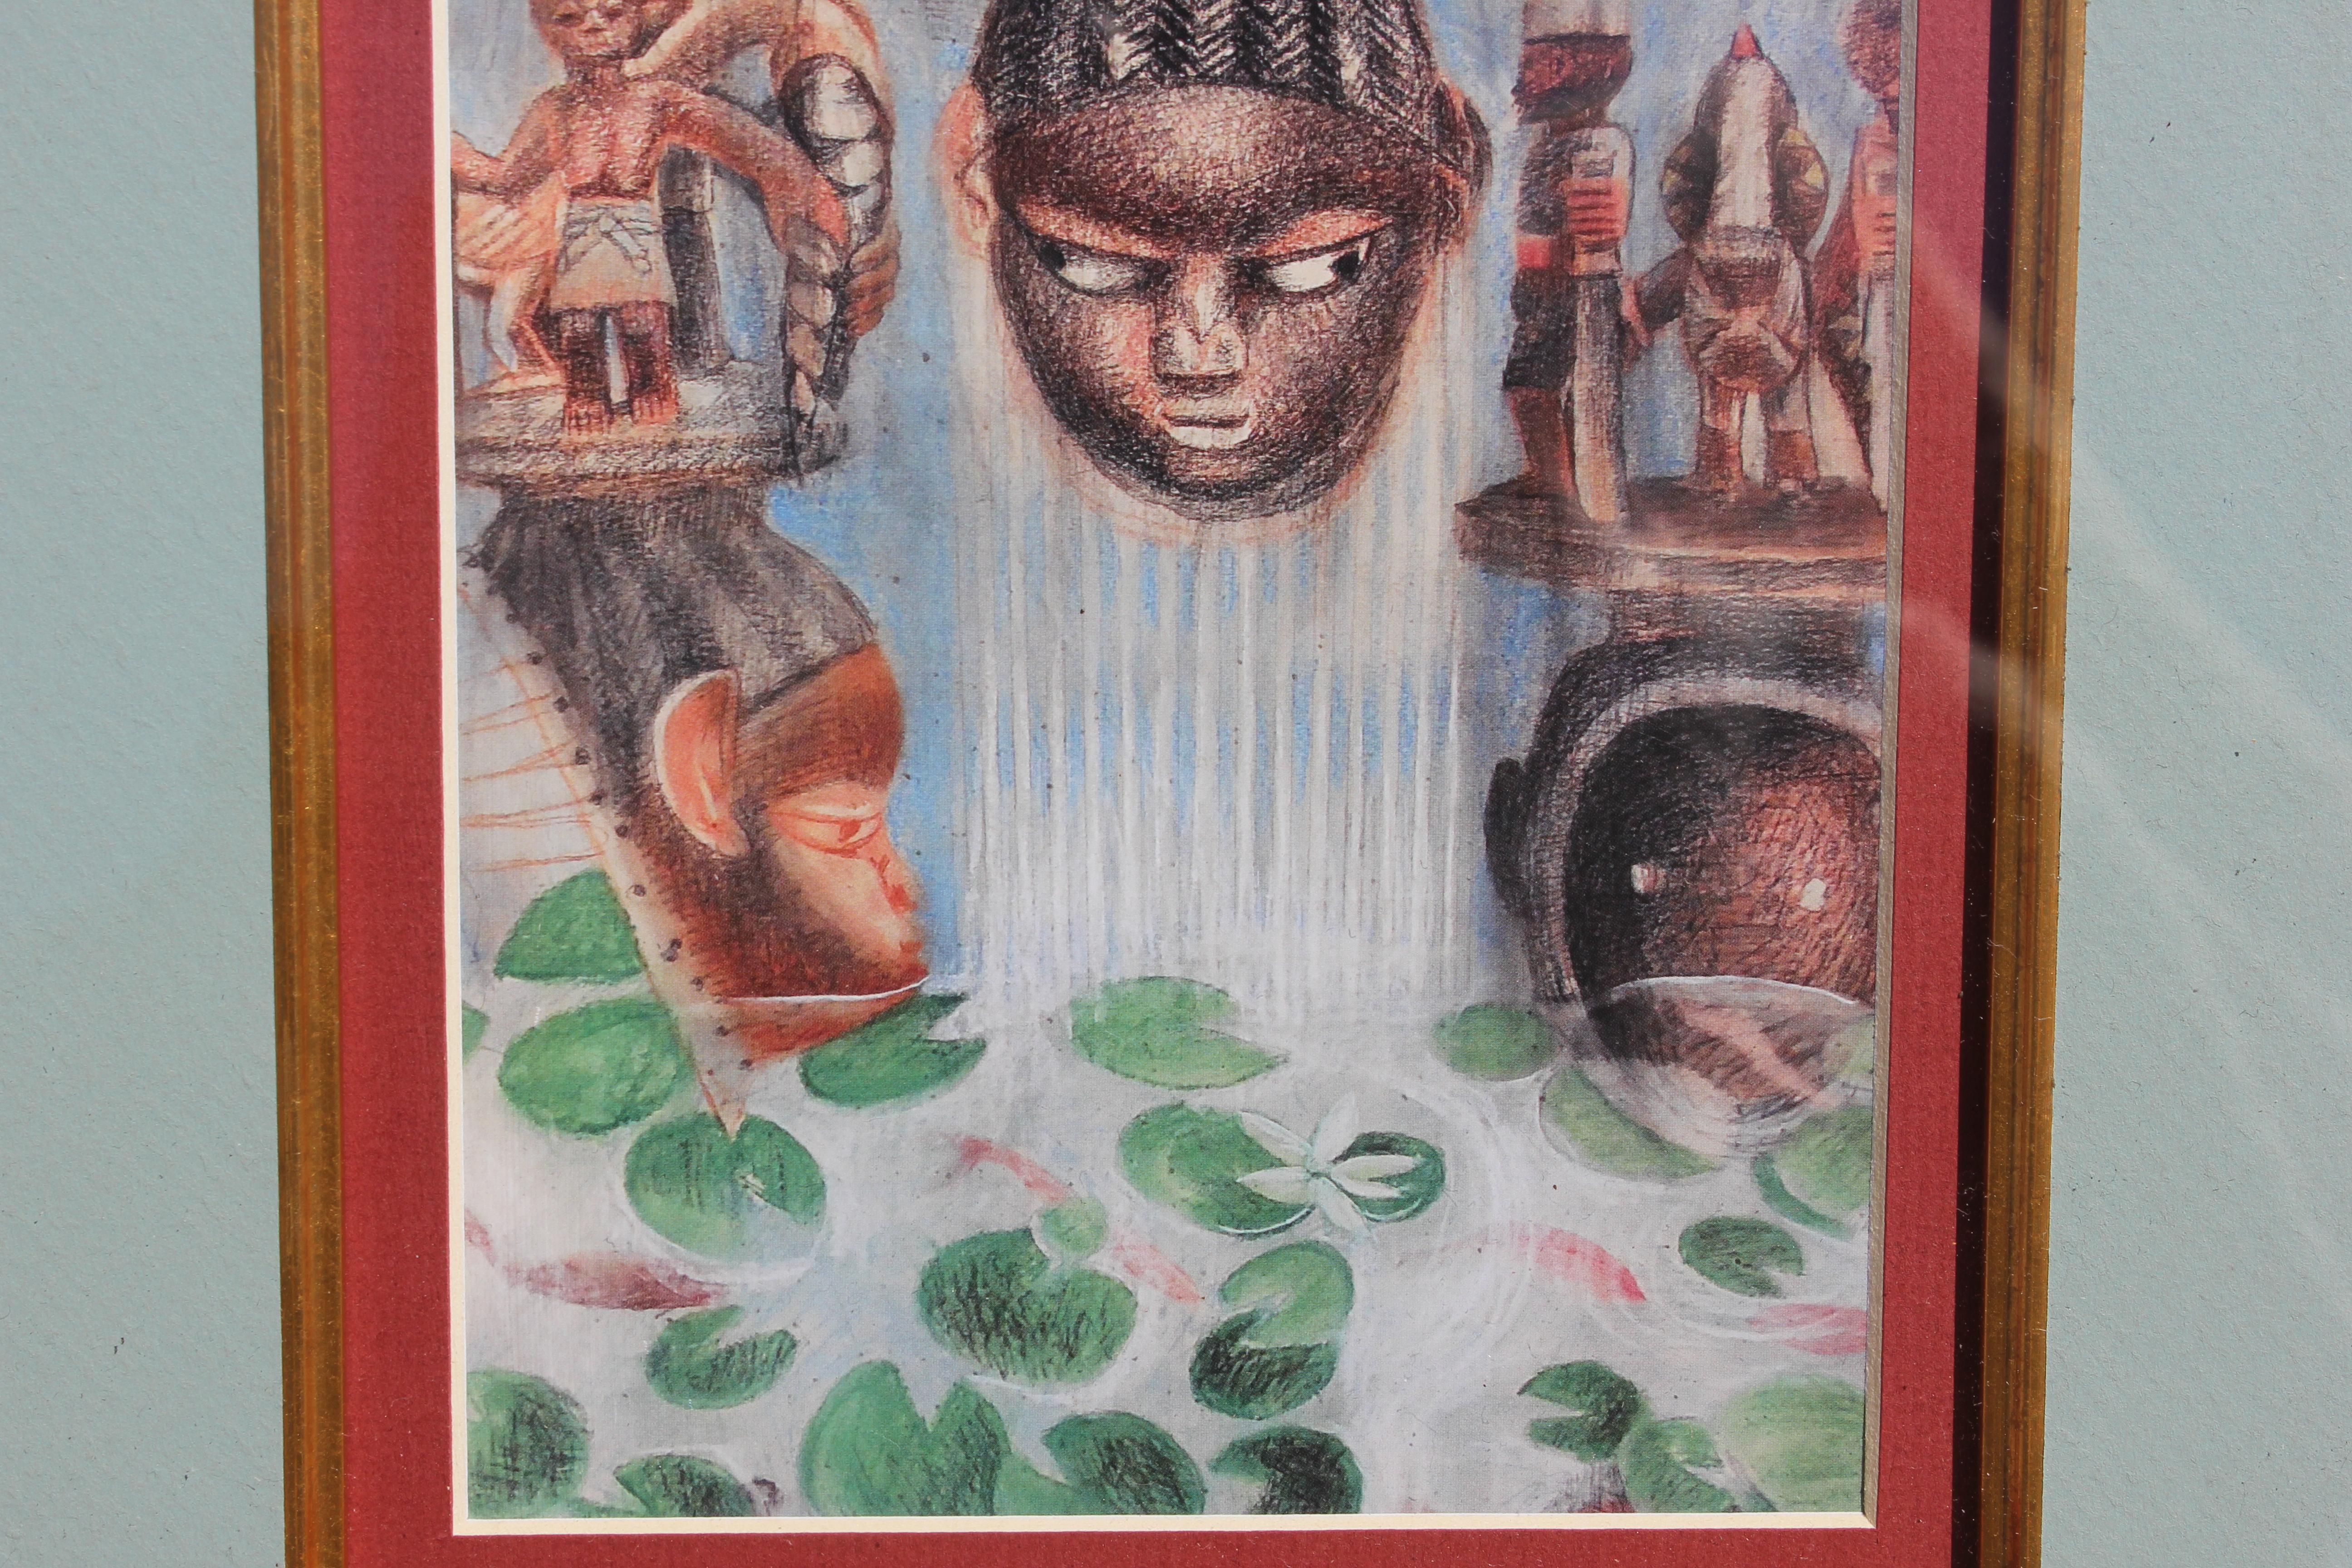 Surrealist print with African heads and other African themed imagery above a pond with lily pads. The print is framed in a decorative gold frame with a light blue matte. The print is not signed. 
Dimensions without frame: H 9 in x W 6 in. 

Artist